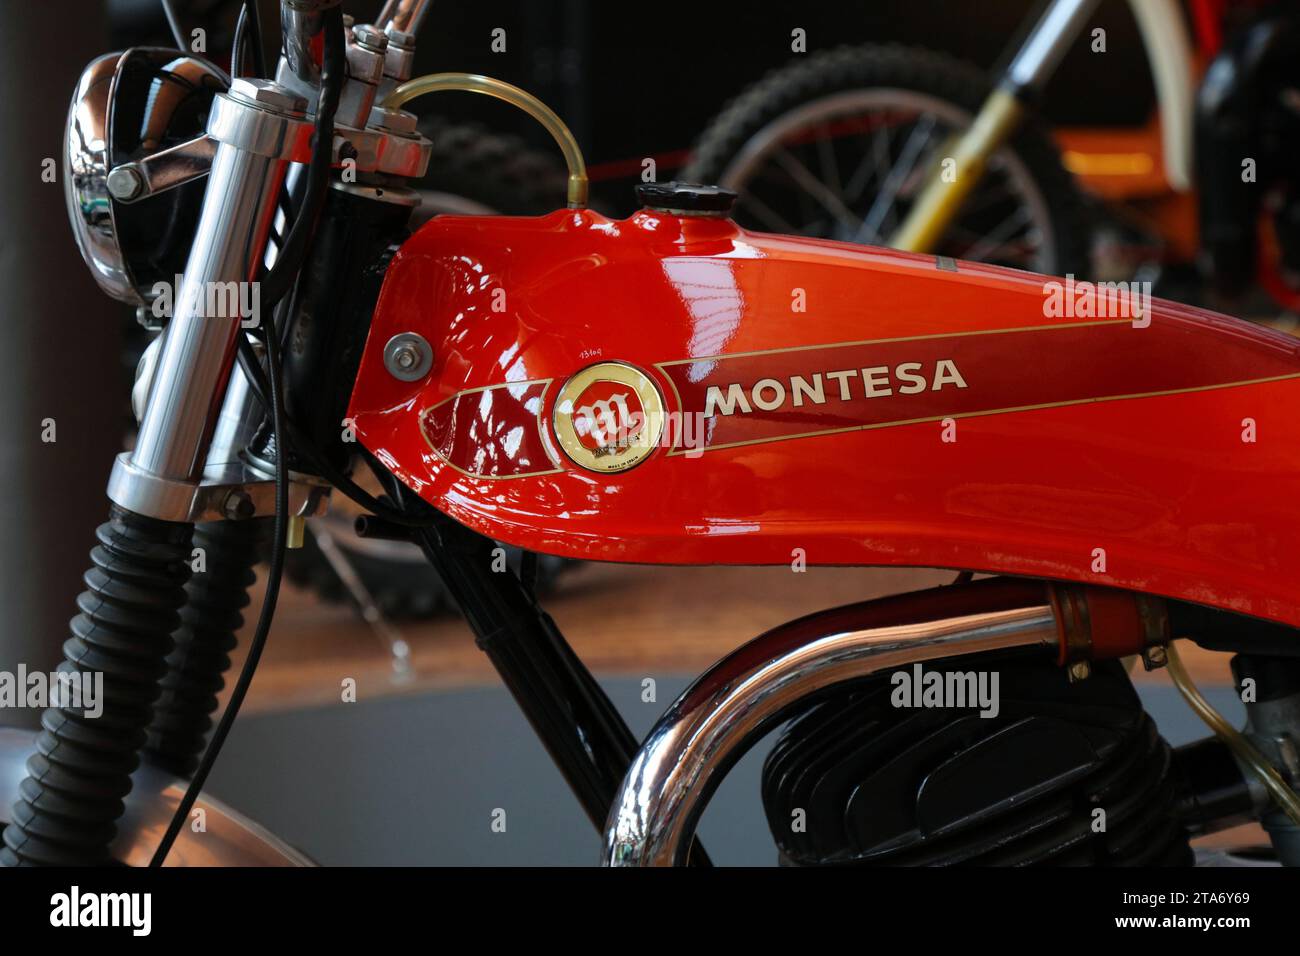 CATALONIA, SPAIN - OCTOBER 6, 2021: Close-up of Montesa historic collectible motorcycle made in Barcelona, Spain. Stock Photo